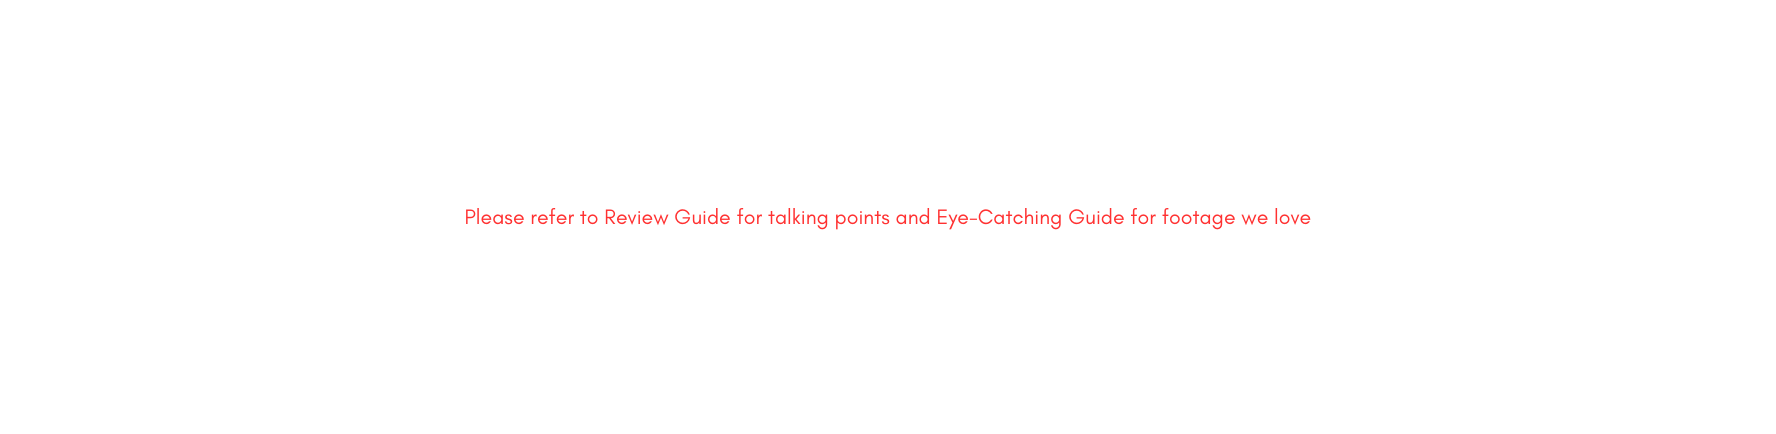 Please refer to Review Guide for talking points and Eye Catching Guide for footage we love